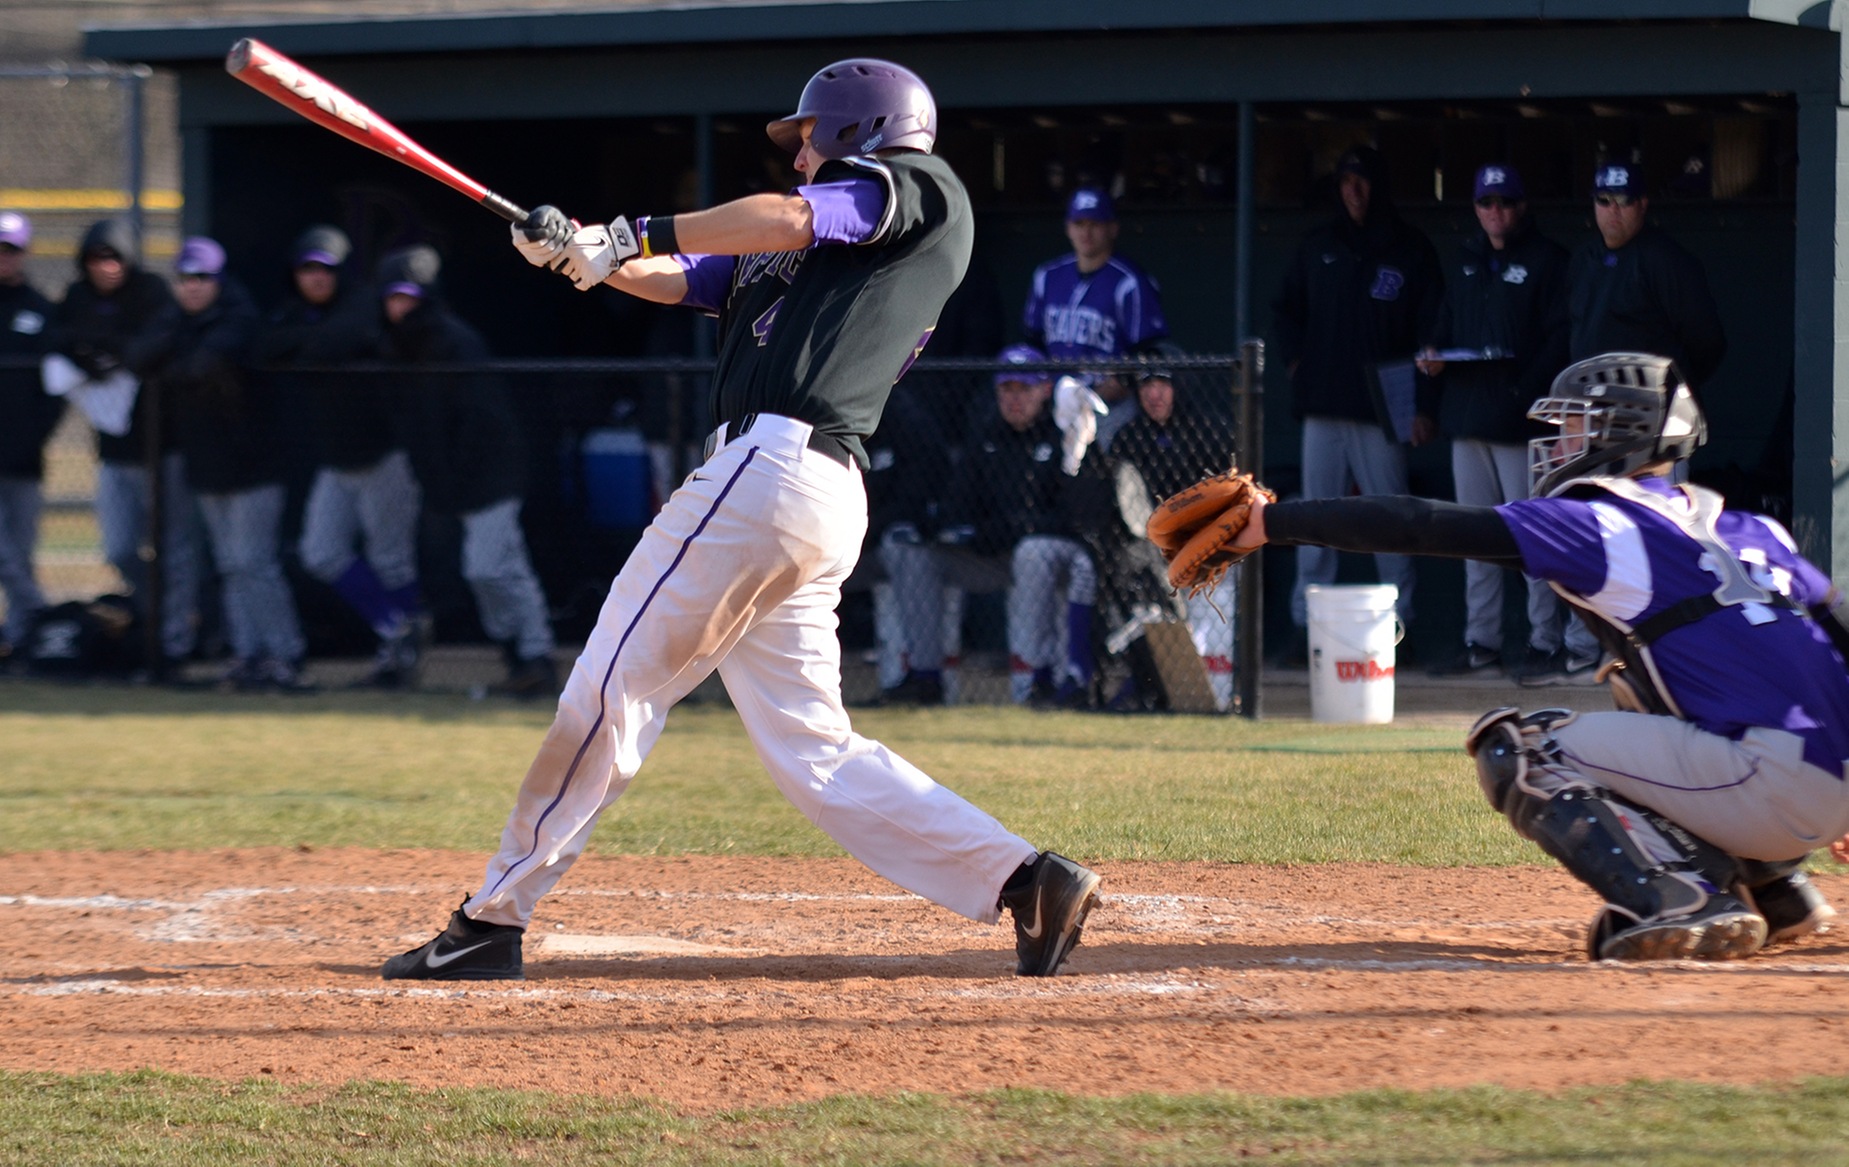 Defiance tops Calvin 12-7, falls to Centre 9-1 in double header